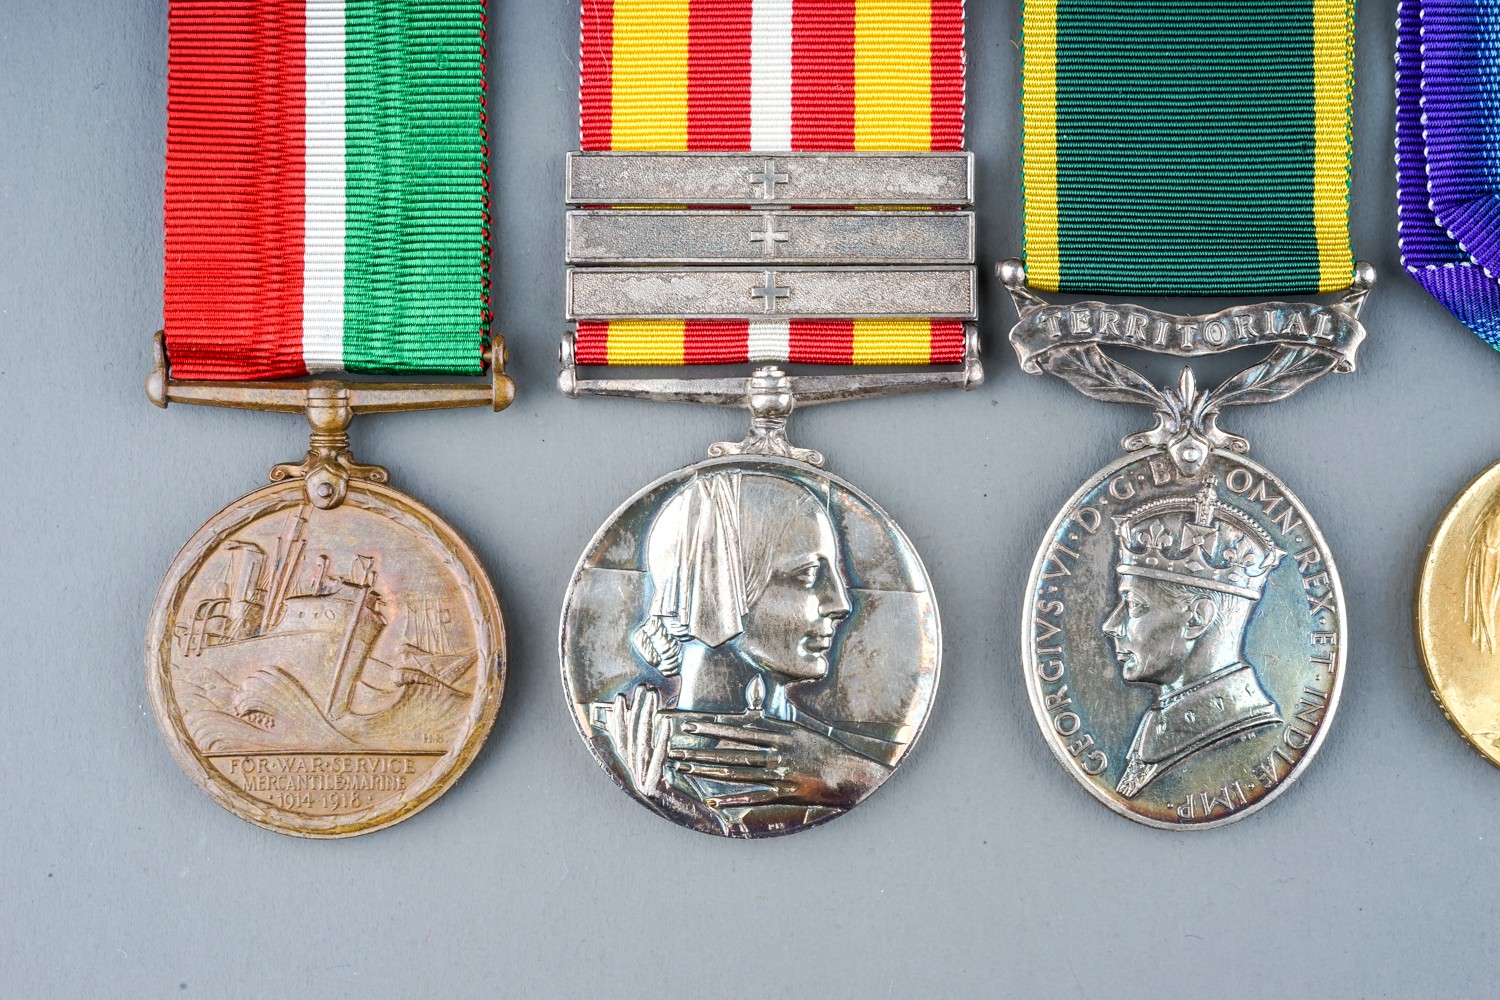 A collection of British Medals. Great War Pair - R-29124 A Cpl H H Simpkins K R Rif C. Condition - Image 5 of 12